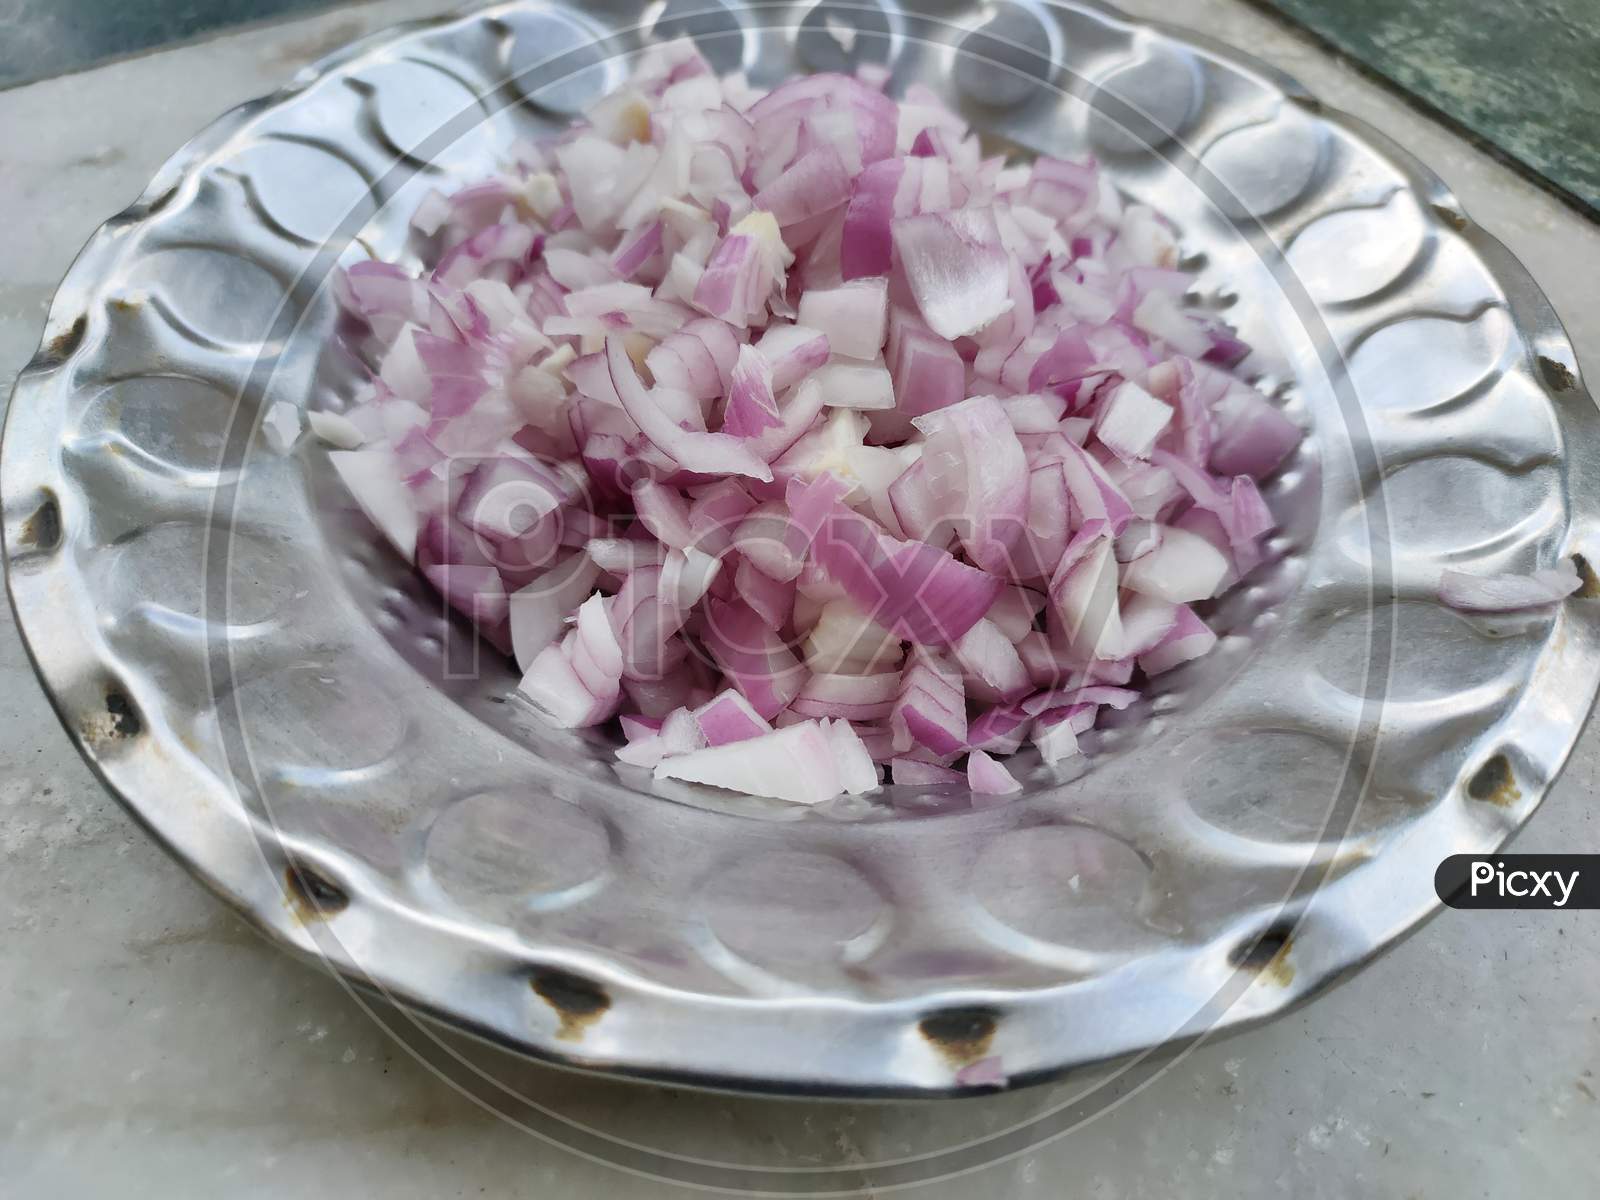 Chopped onion pieces in plate